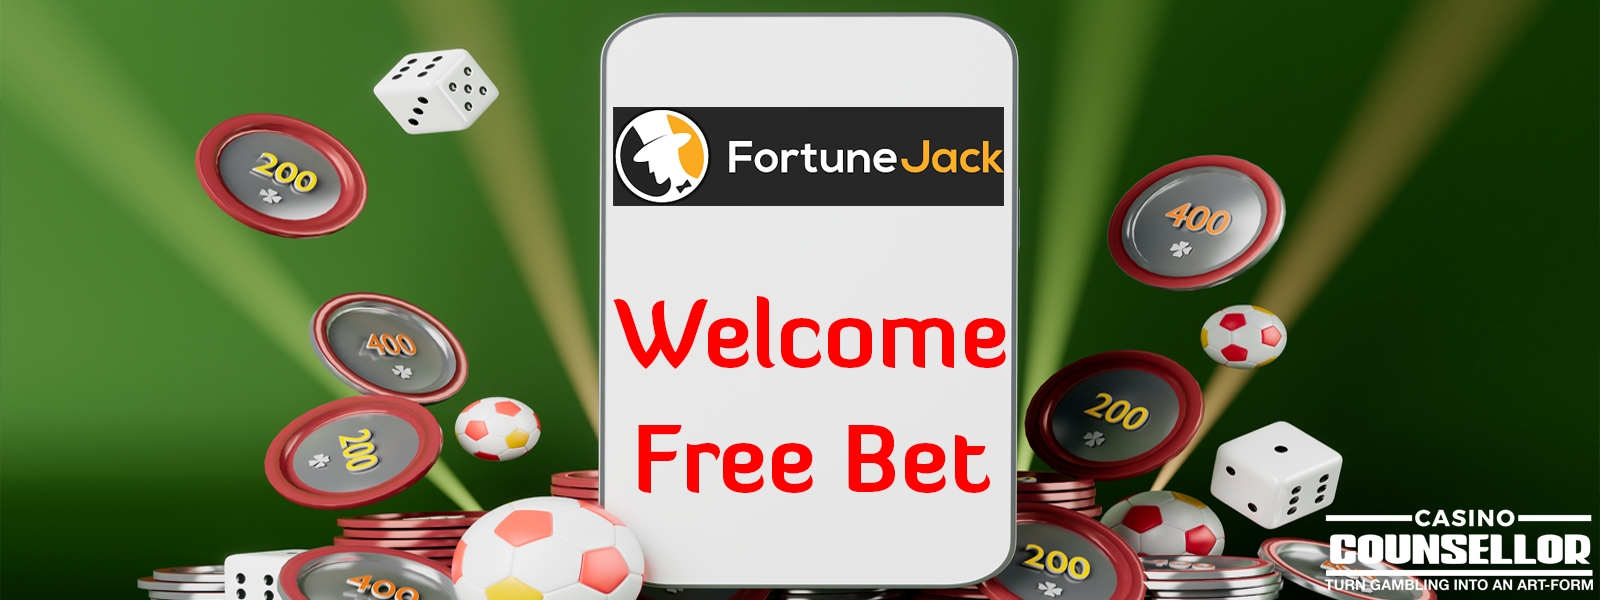 FortuneJack welcome free bet, free bet promotion, Online Betting,